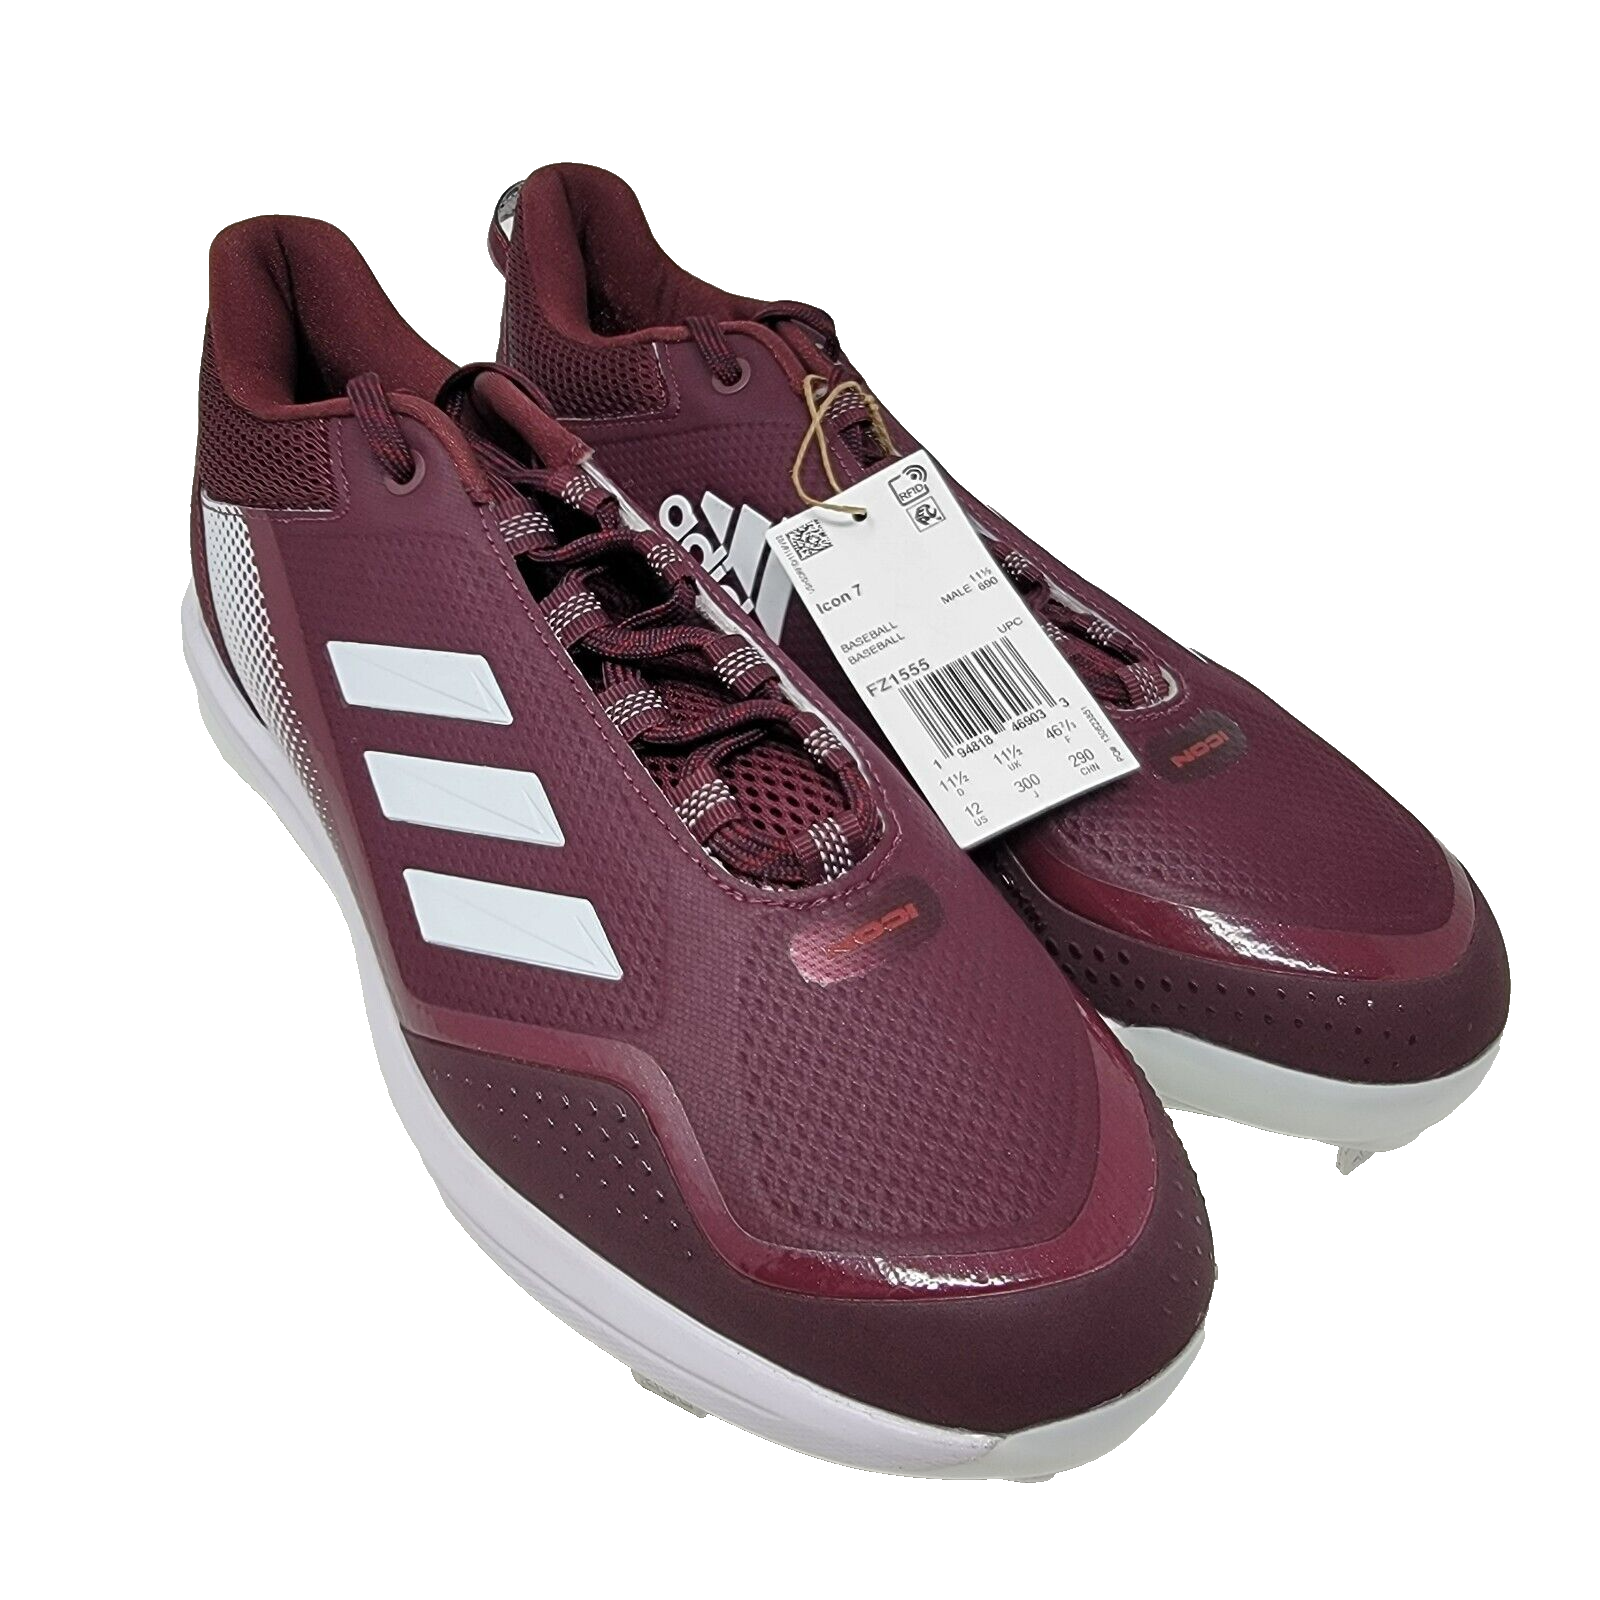 Primary image for Adidas Icon 7 Metal Baseball Cleats Burgundy Red White FZ1555 Men’s Sz 12